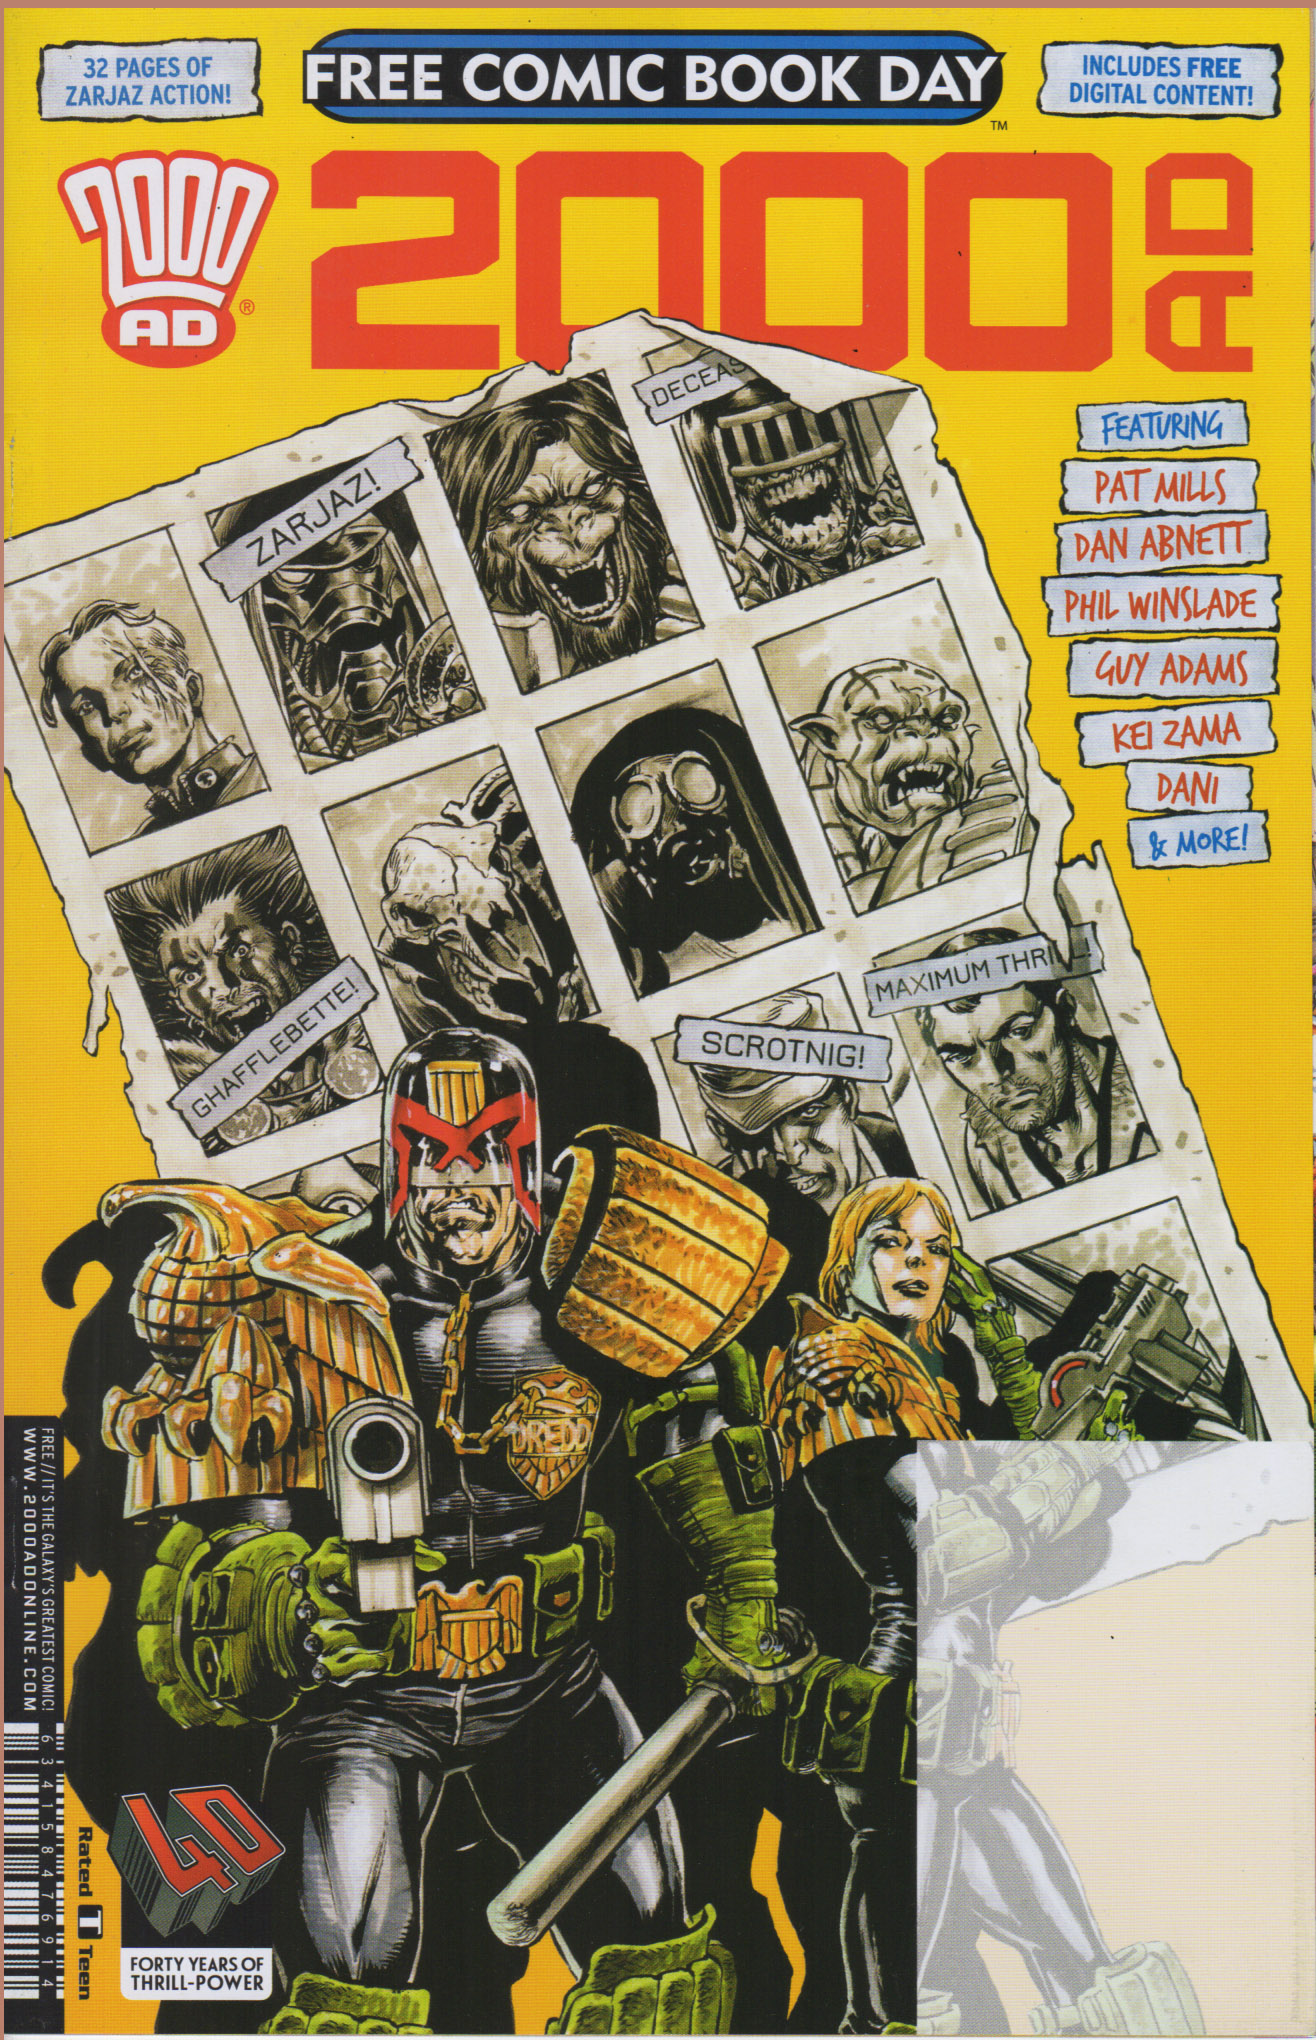 2000AD #829 APRIL 3 1993 WITH STICKERS